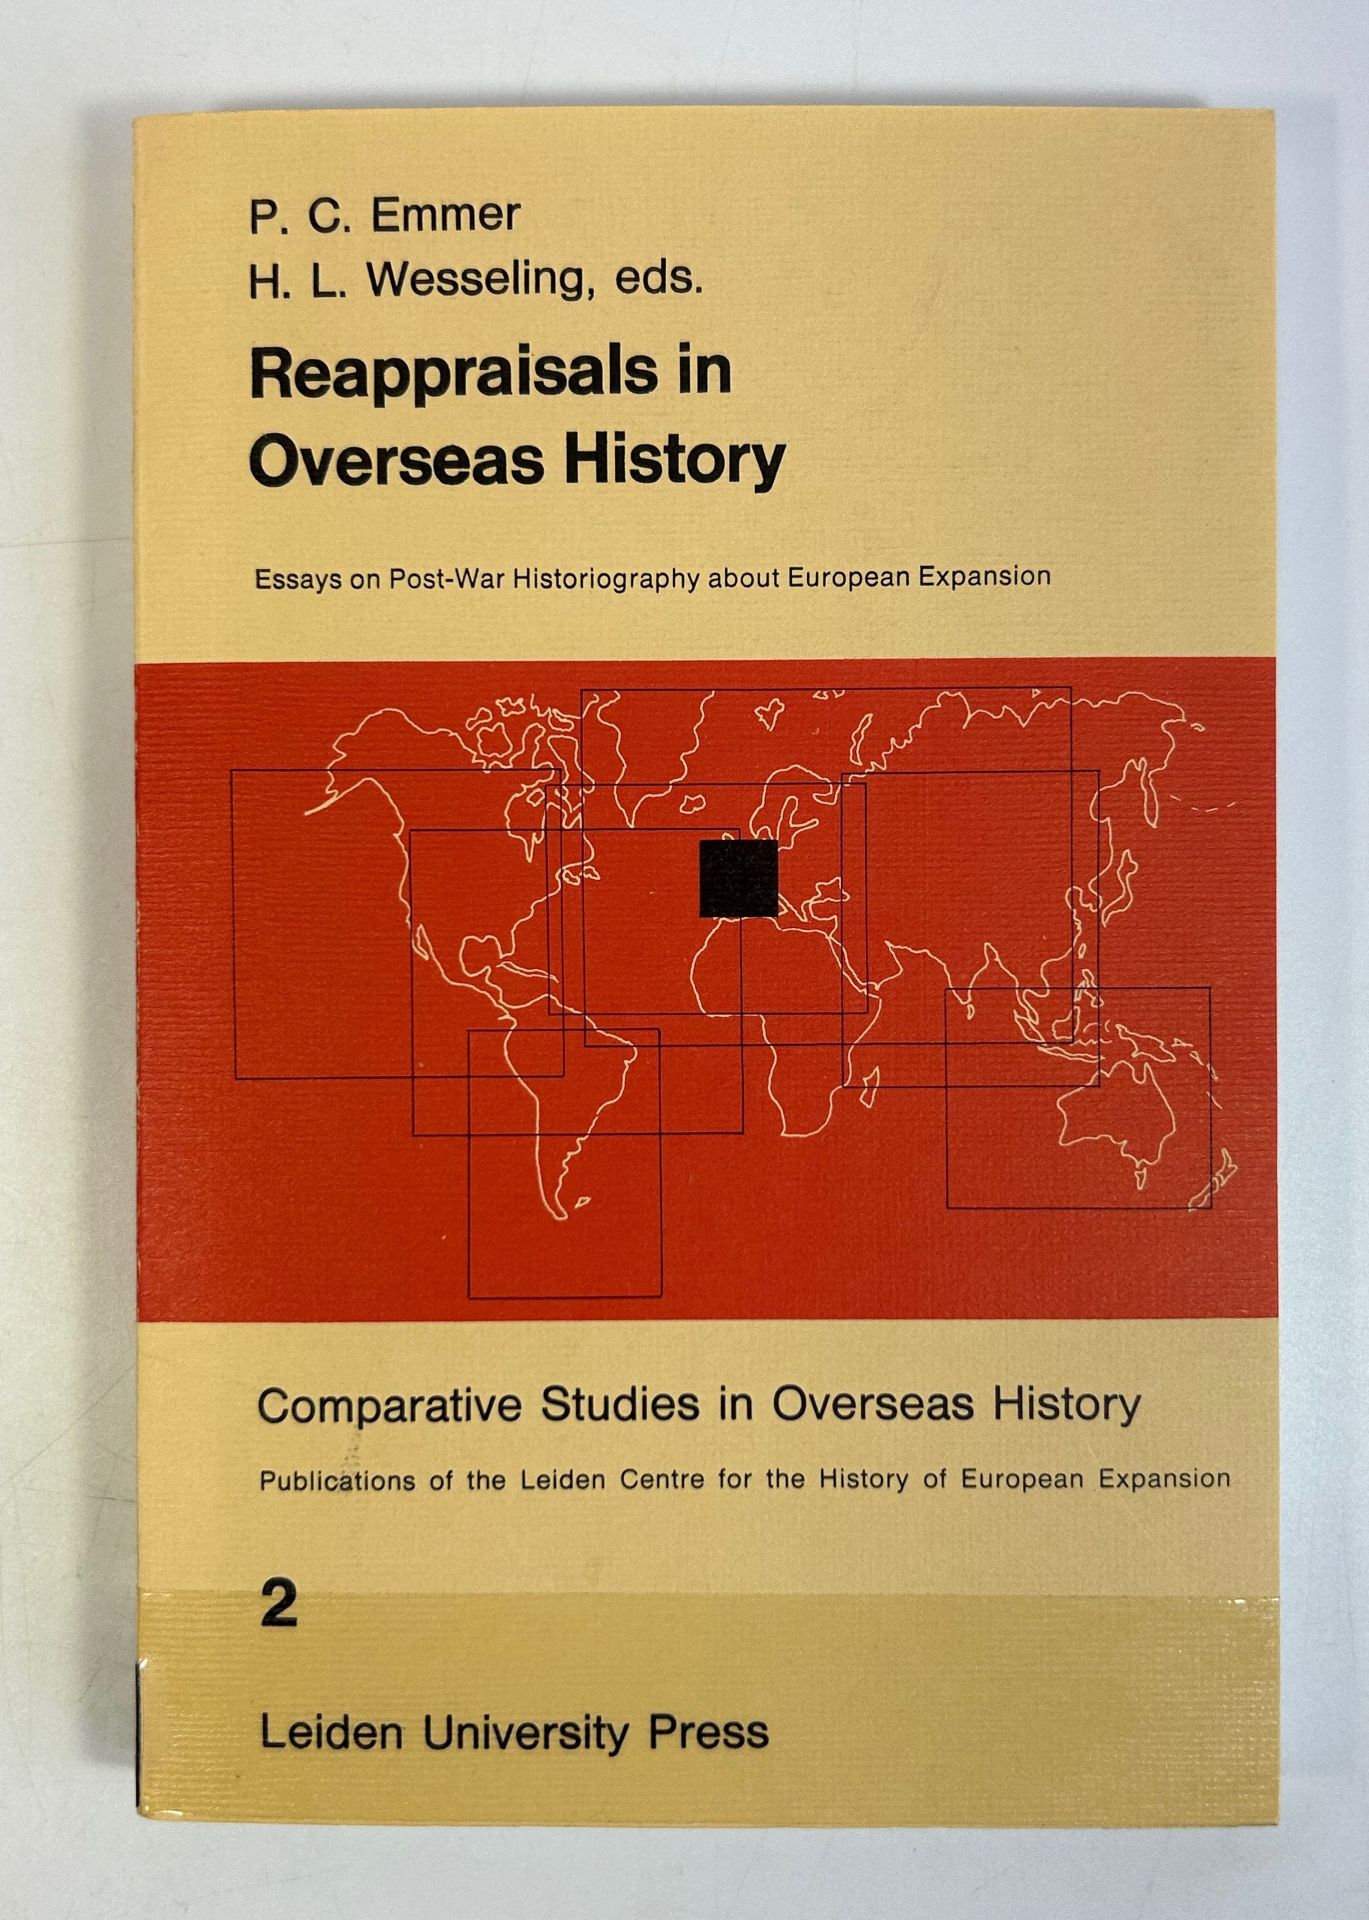 Reappraisals in overseas history : essays on post-war historiography about European expansion. (= Comparative studies in overseas history ; 2). - Emmer, P. C. (Ed.) and H. L. (Ed.) Wesseling